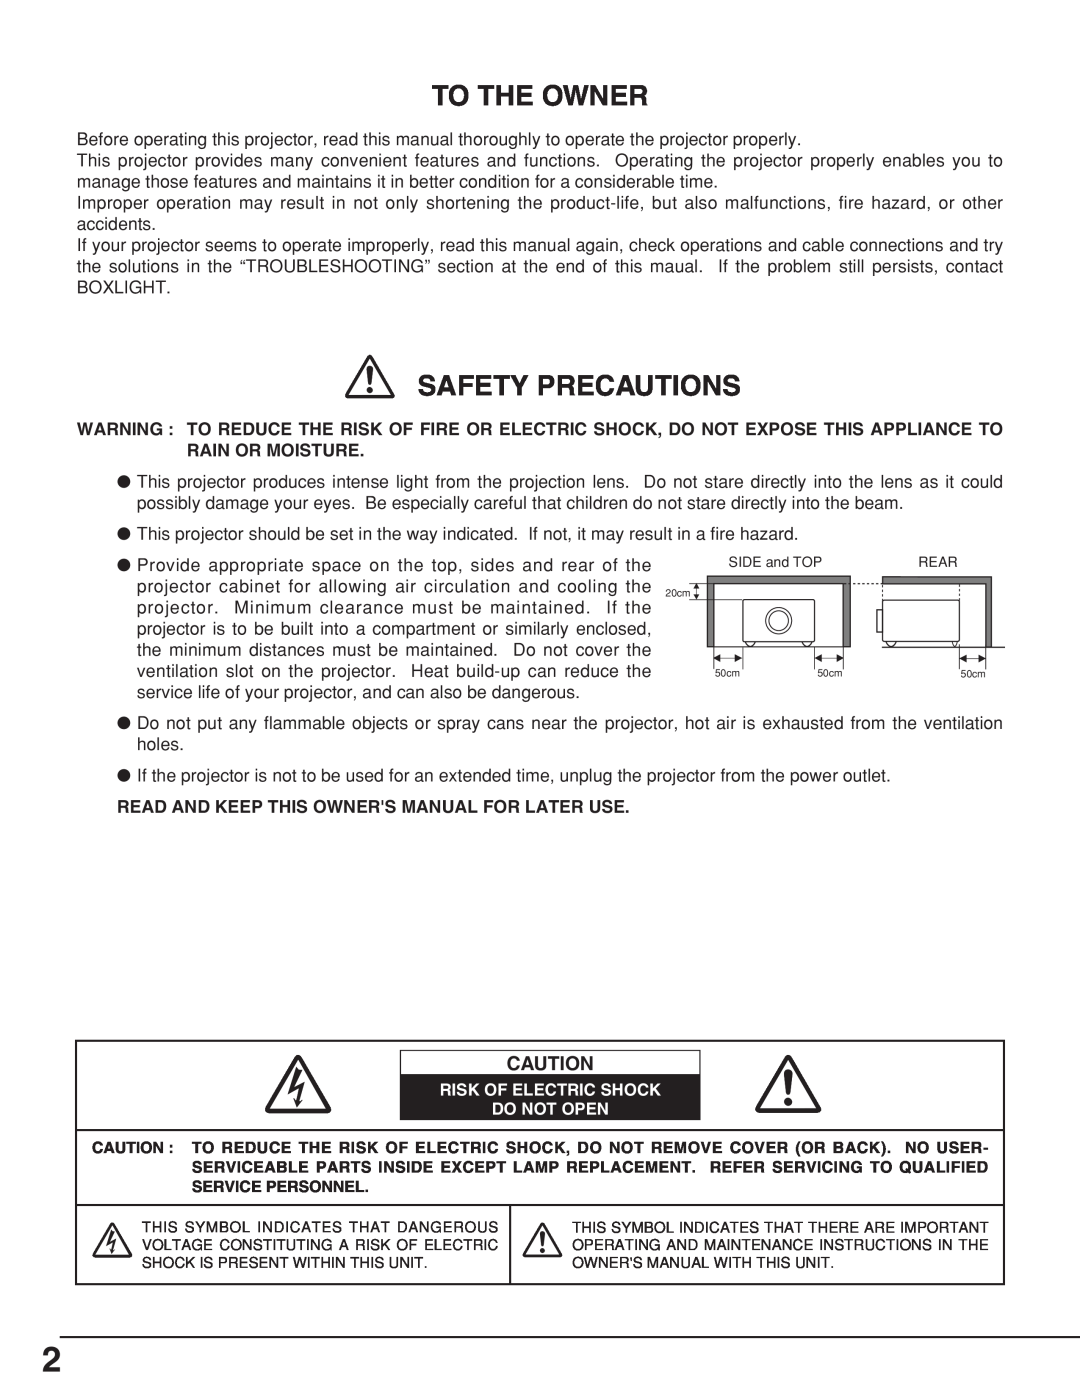 BOXLIGHT CP-19t manual To The Owner, Safety Precautions, Read And Keep This Owners Manual For Later Use 